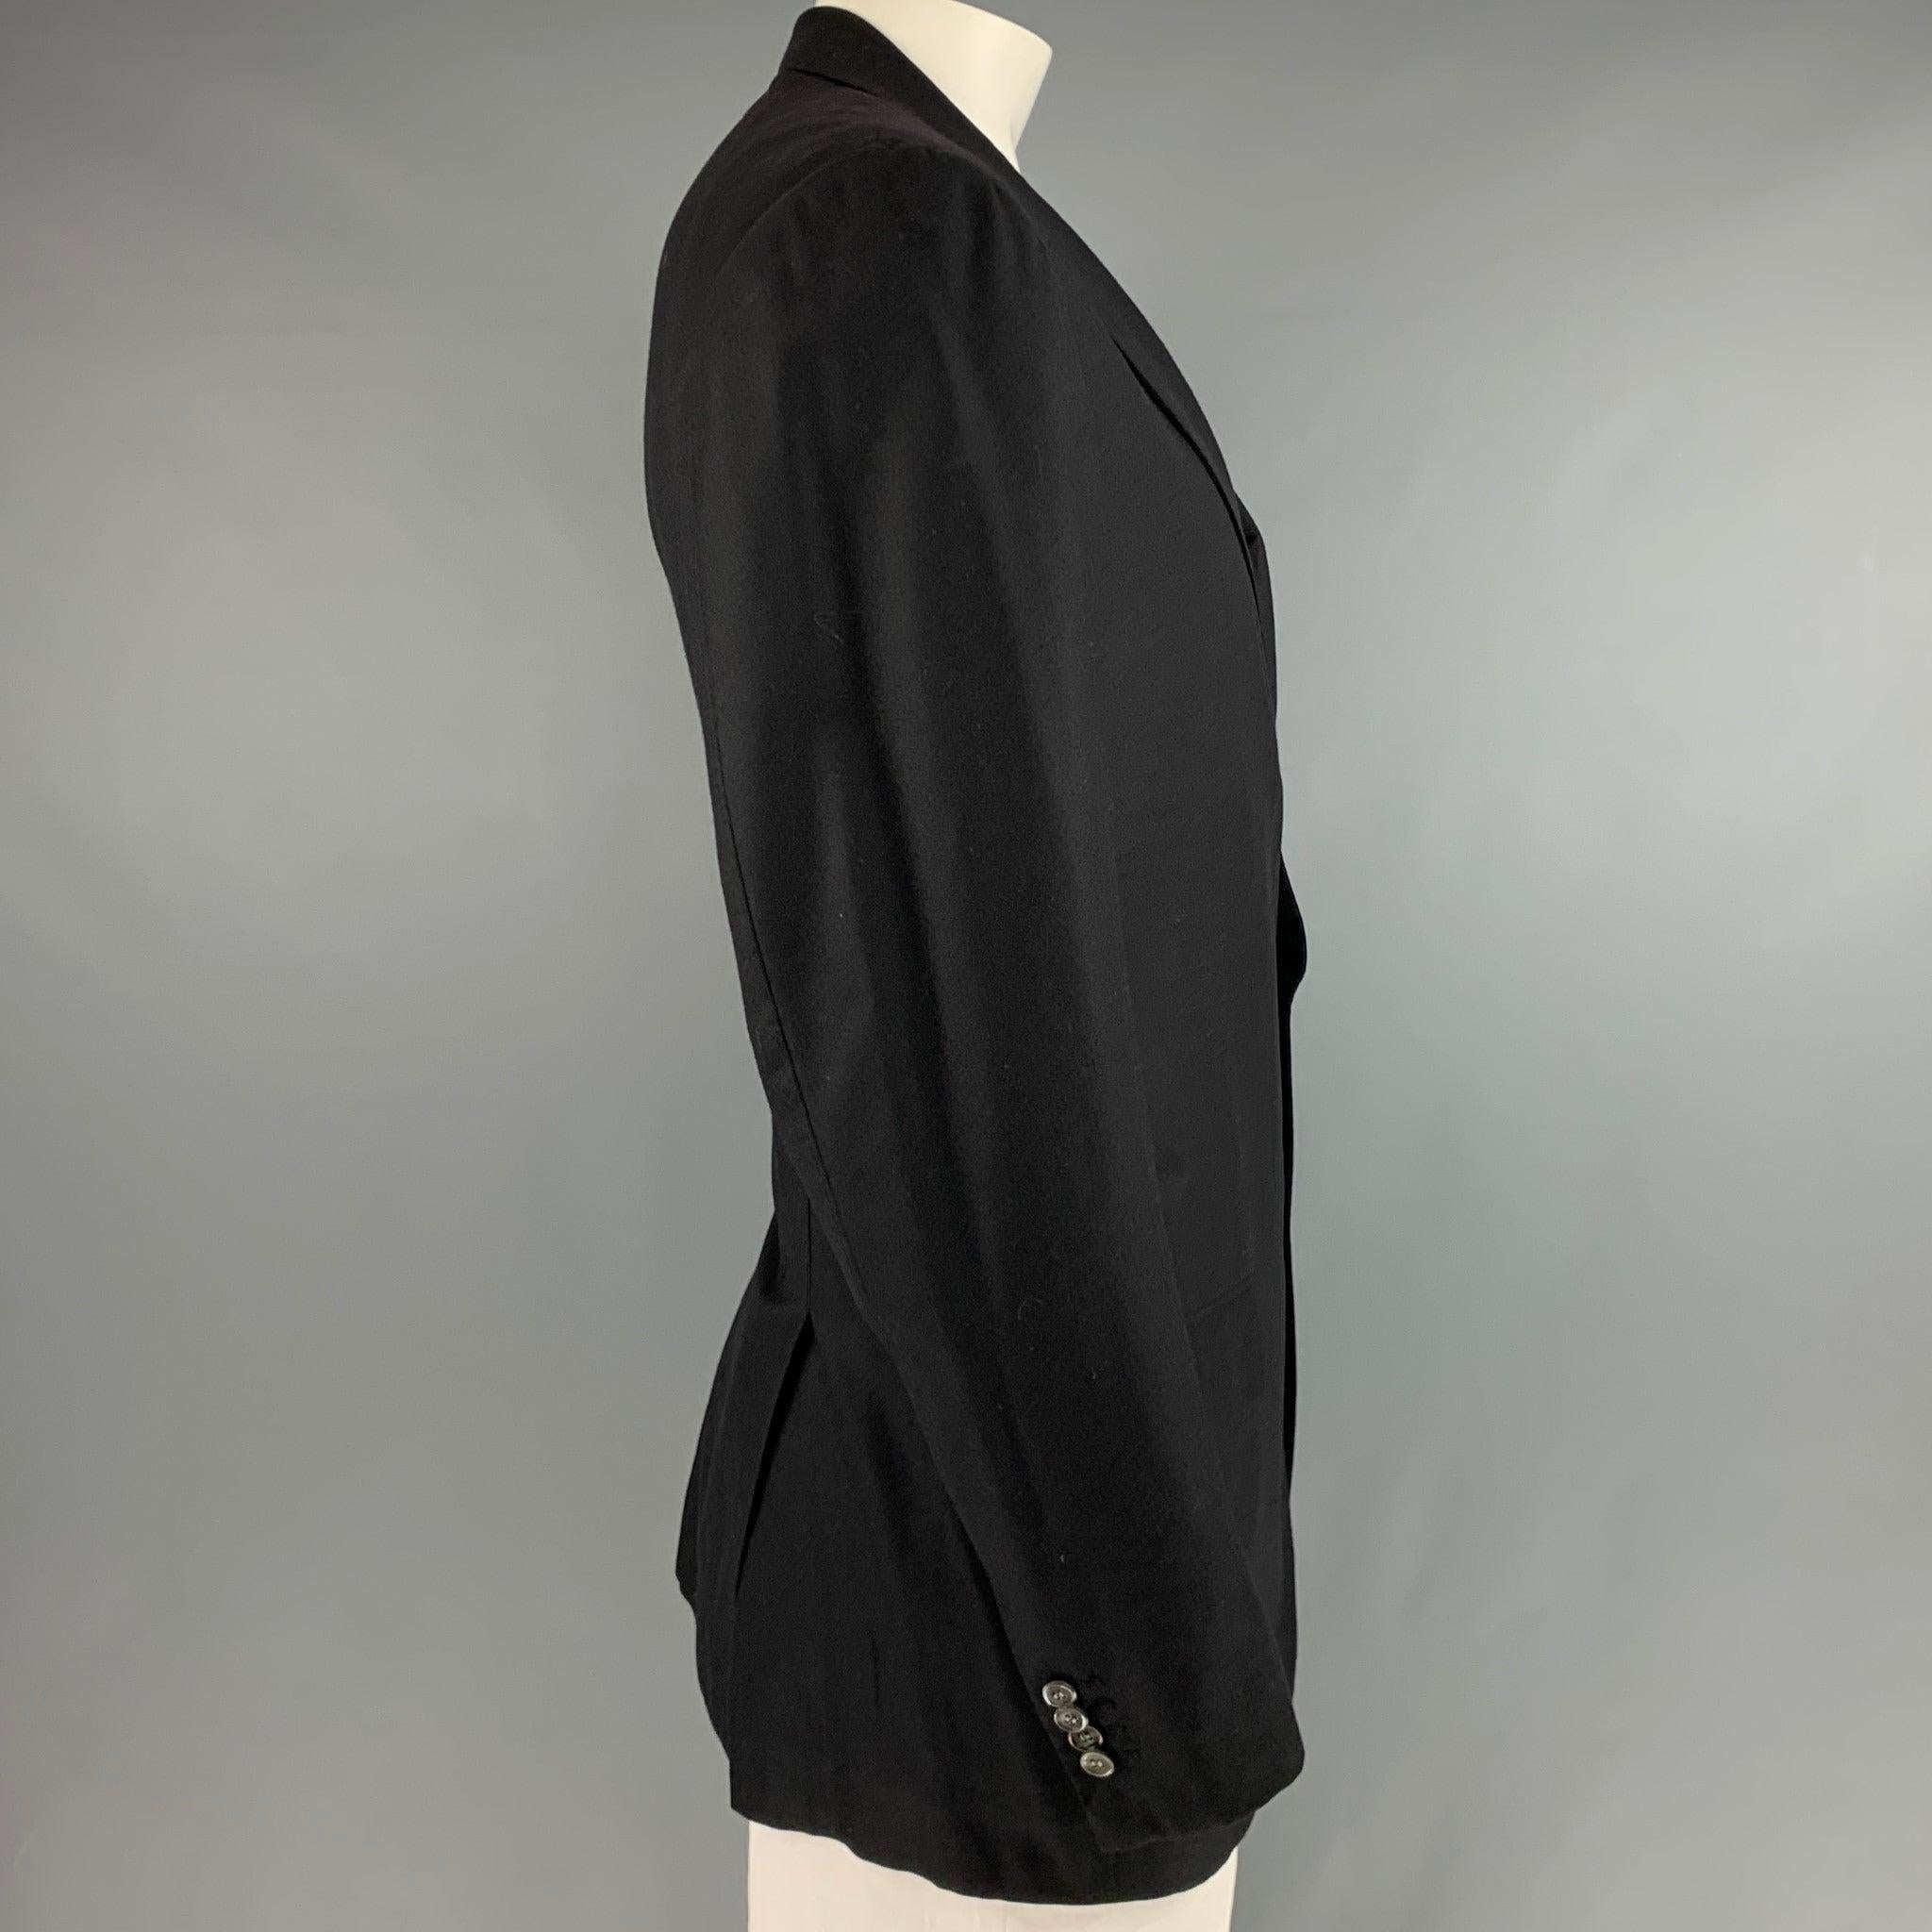 KITON for WILKES BASHFORD
sport coat in a black wool fabric featuring notch lapel, flap pockets, and a double button closure. Made in Italy.Excellent Pre-Owned Condition. 

Marked:   56 

Measurements: 
 
Shoulder: 18.5 inches Chest: 46 inches